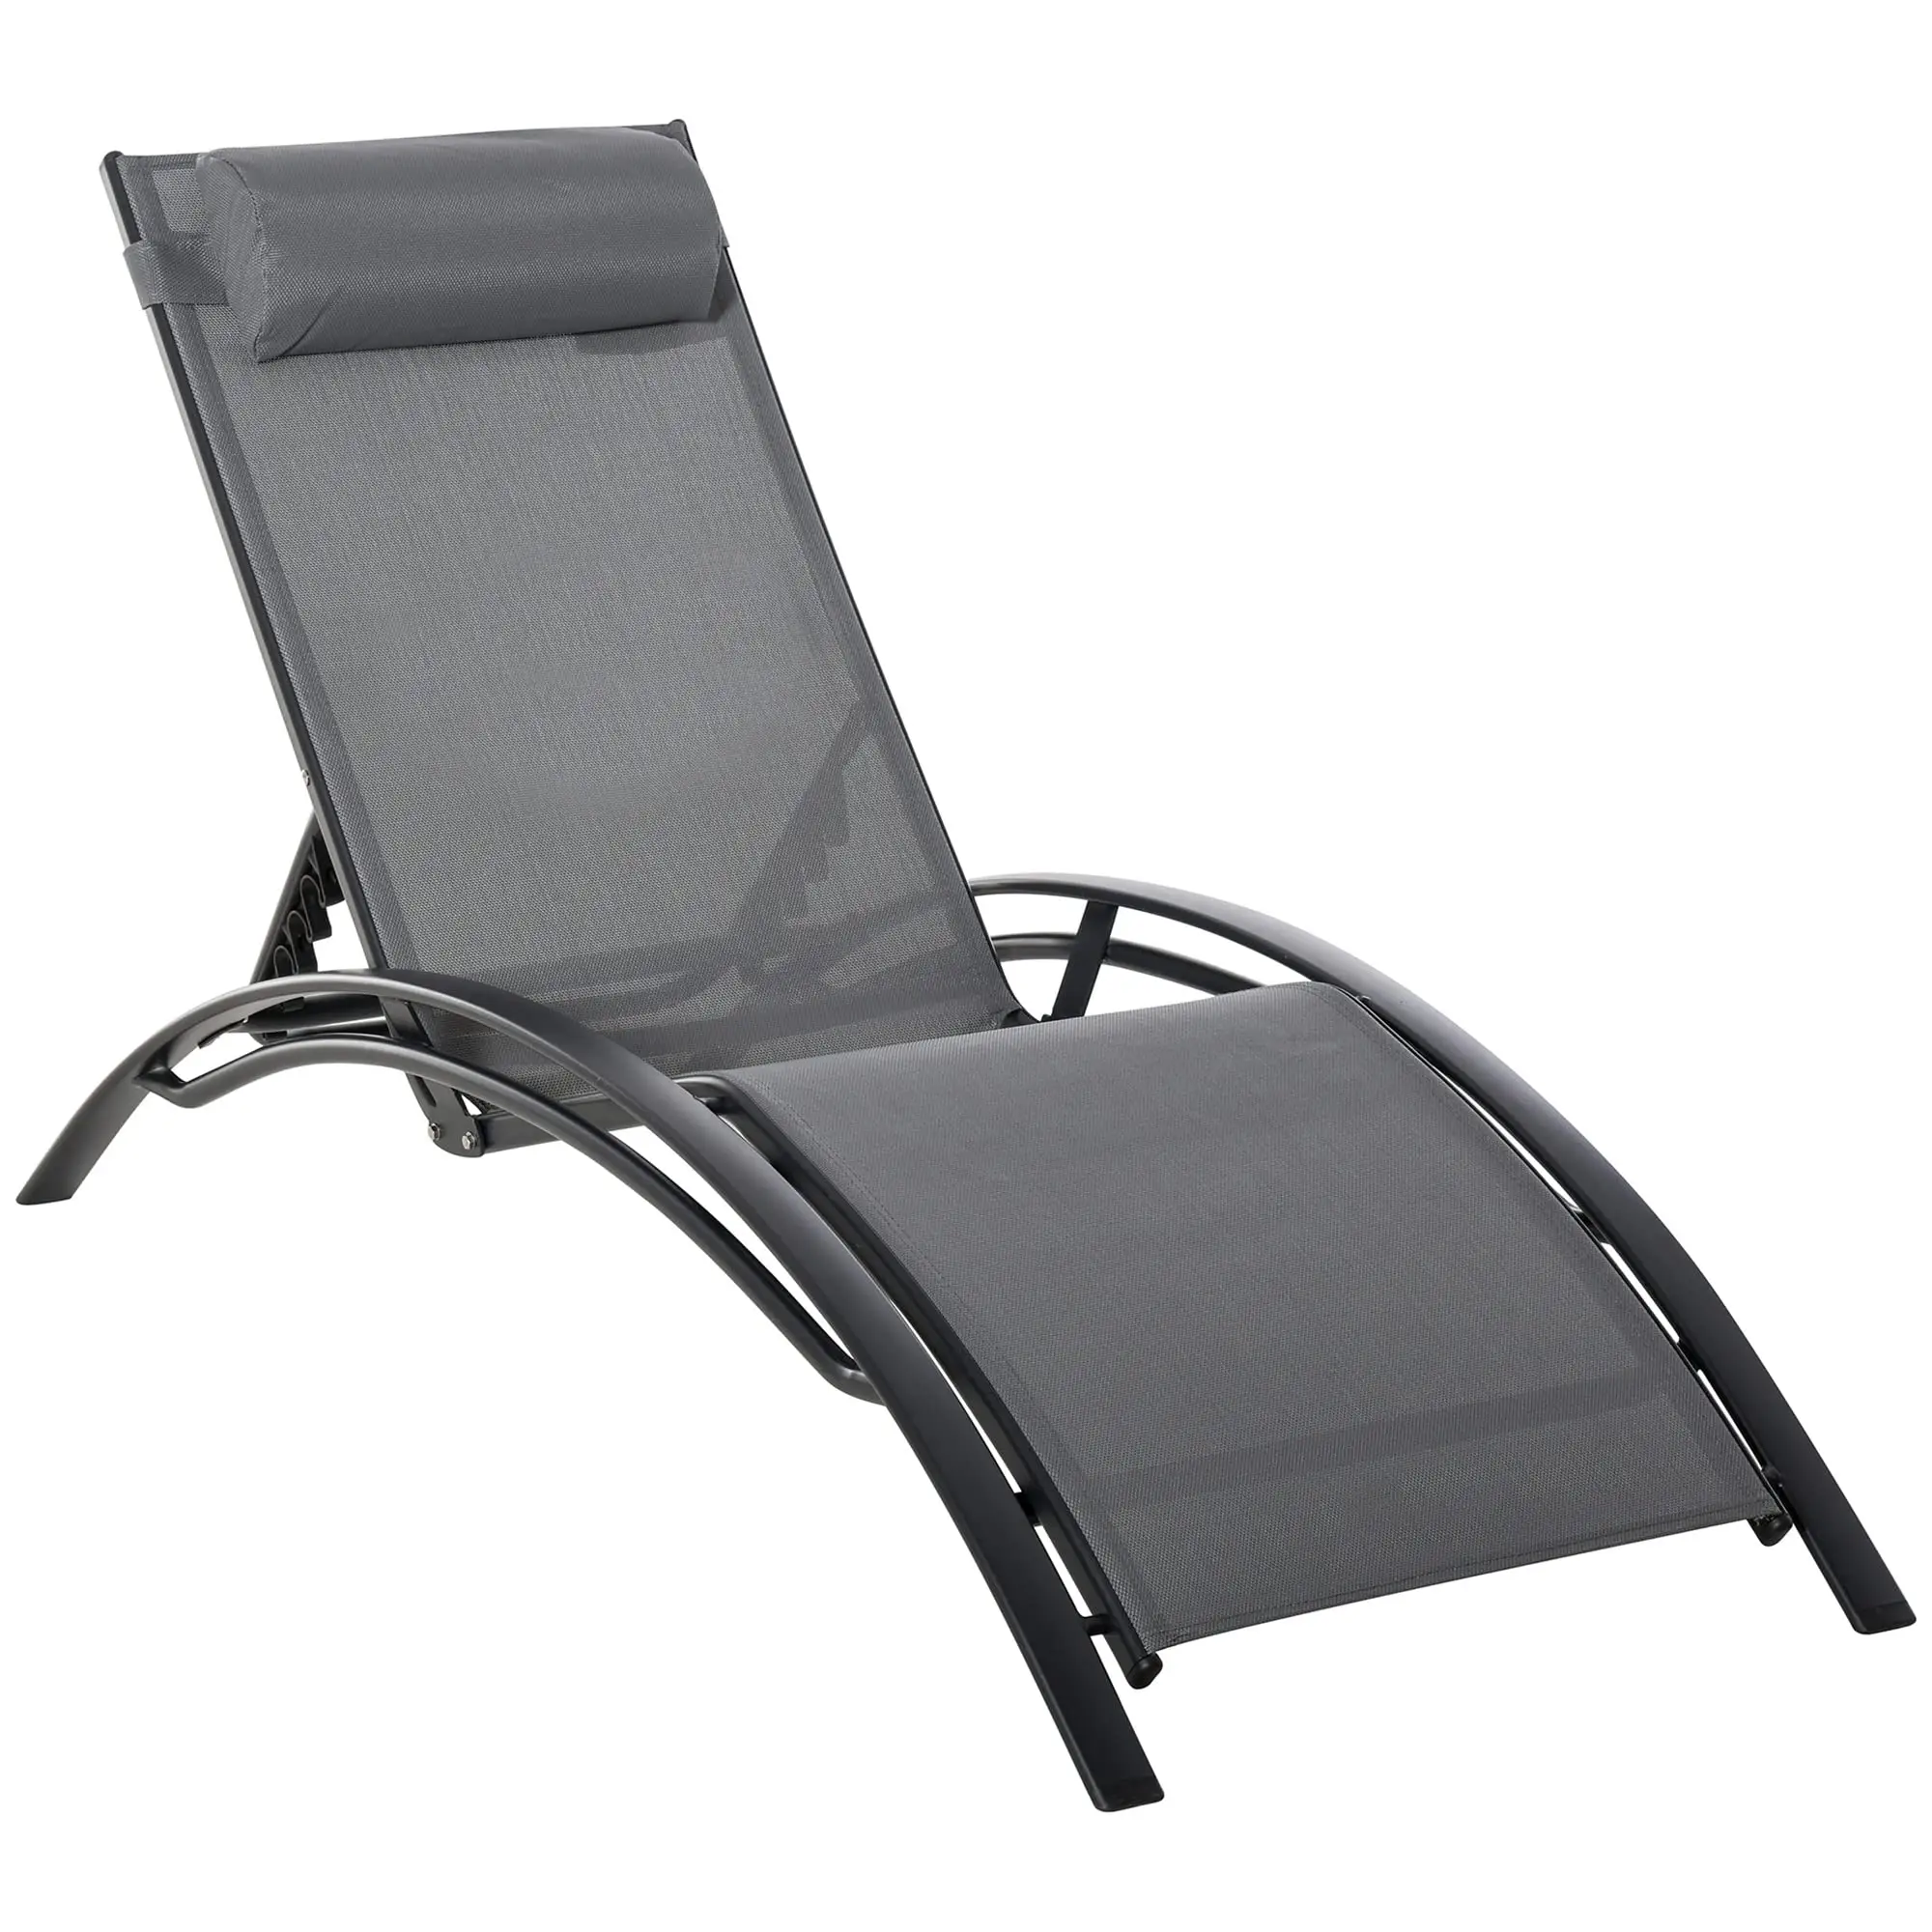 Tumbonas Beach Sun Bed Outdoor Daybed Set Möbel Liege Pool Side Metall Lounge Stühle Day Loungers